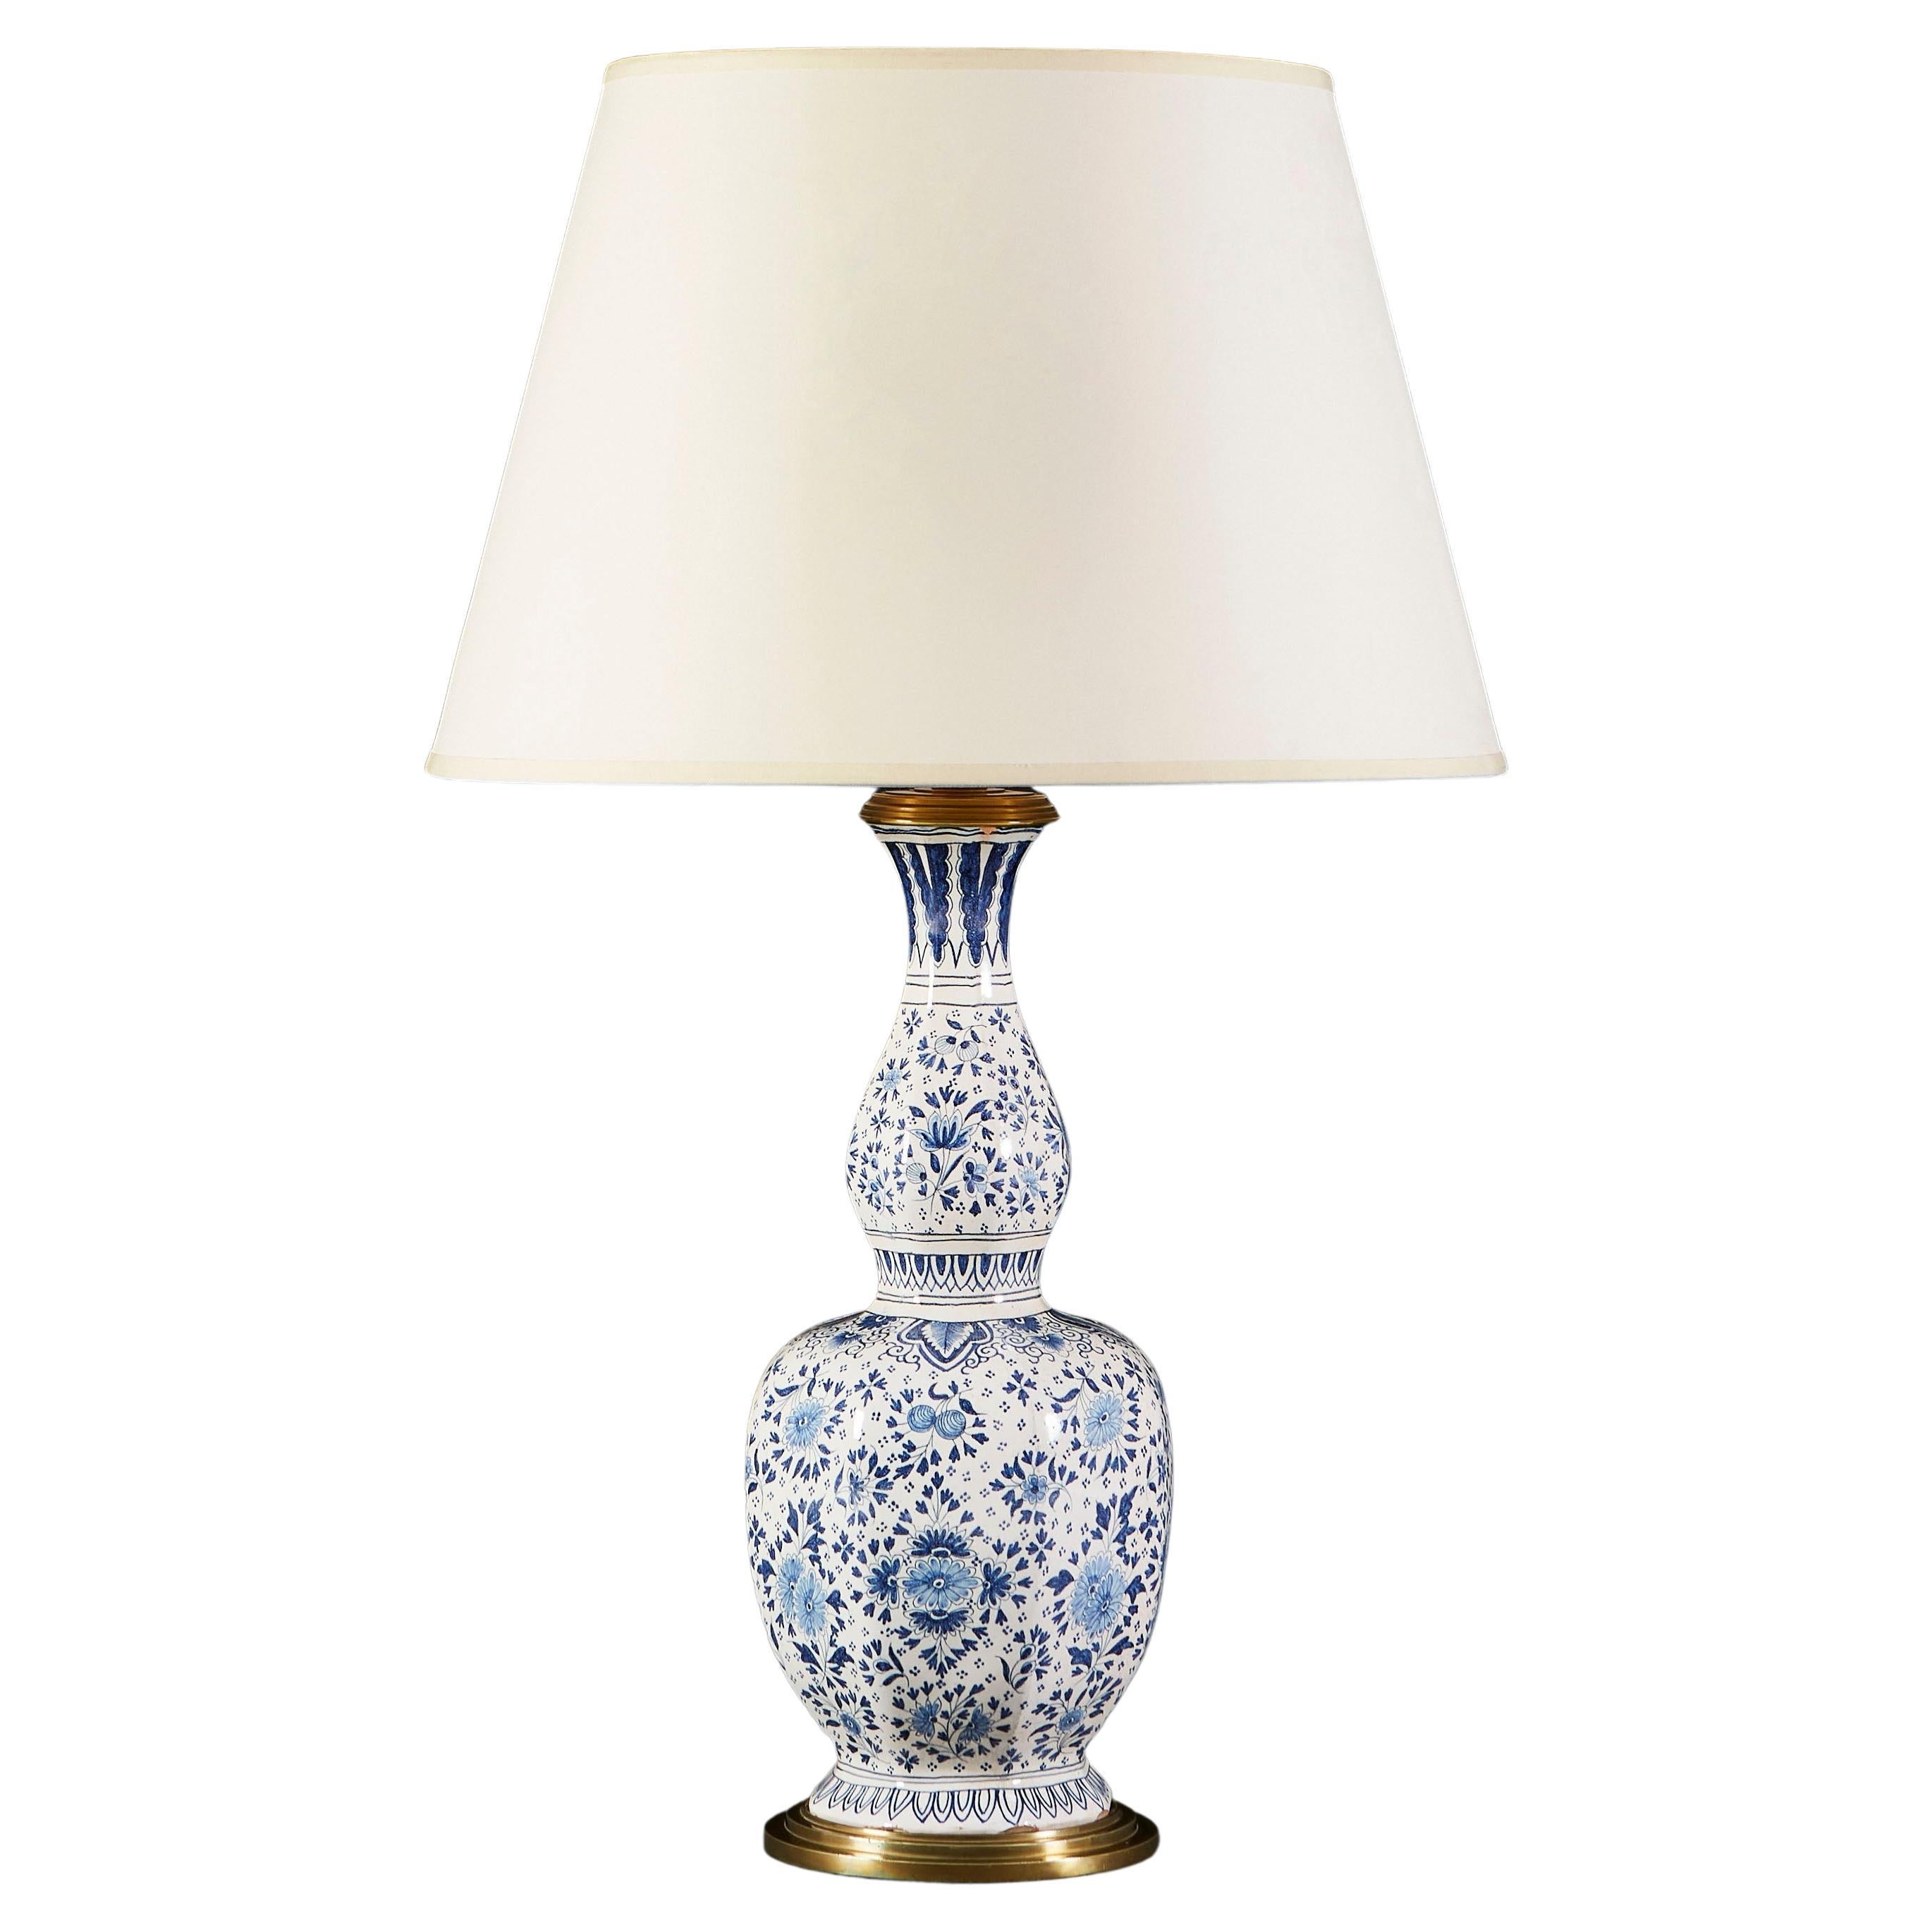 Large 19th Century Blue and White Delft Lamp